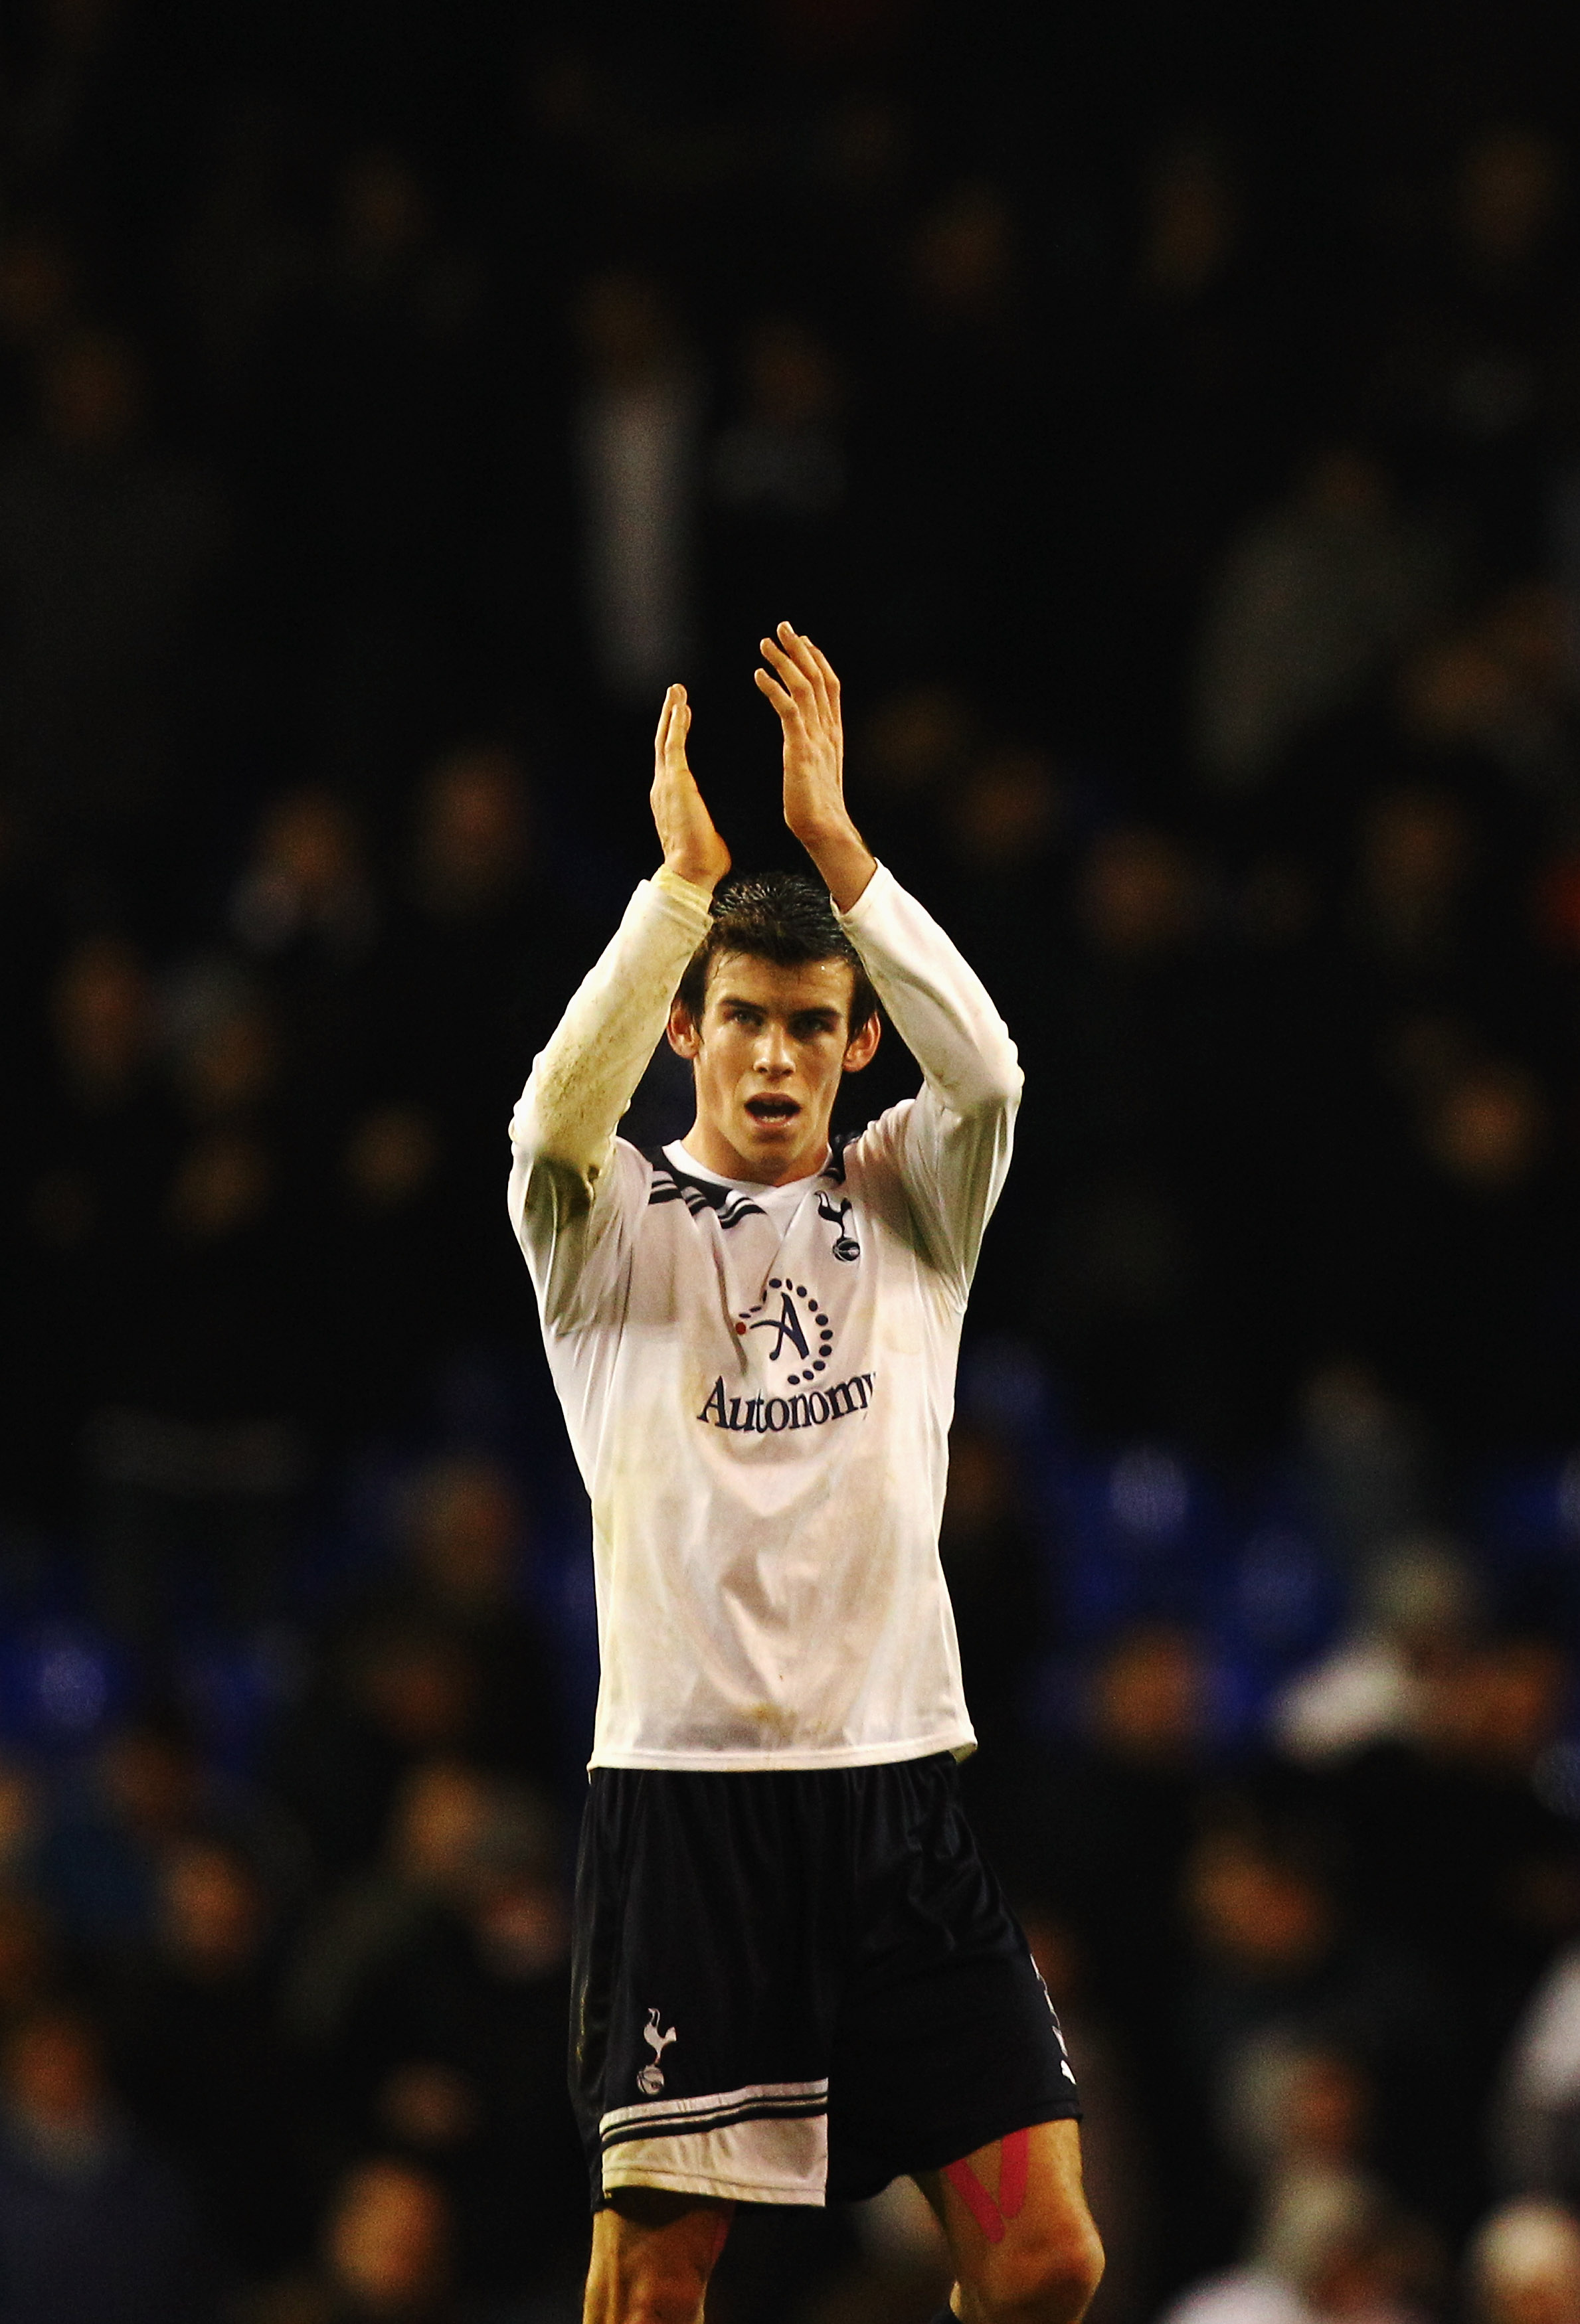 LONDON, UNITED KINGDOM - JANUARY 01:  Gareth Bale of Tottenham Hotspur applauds the home crowd following the Barclays Premier League match between Tottenham Hotspur and Fulham at White Hart Lane on January 1, 2011 in London, England.  (Photo by Richard He